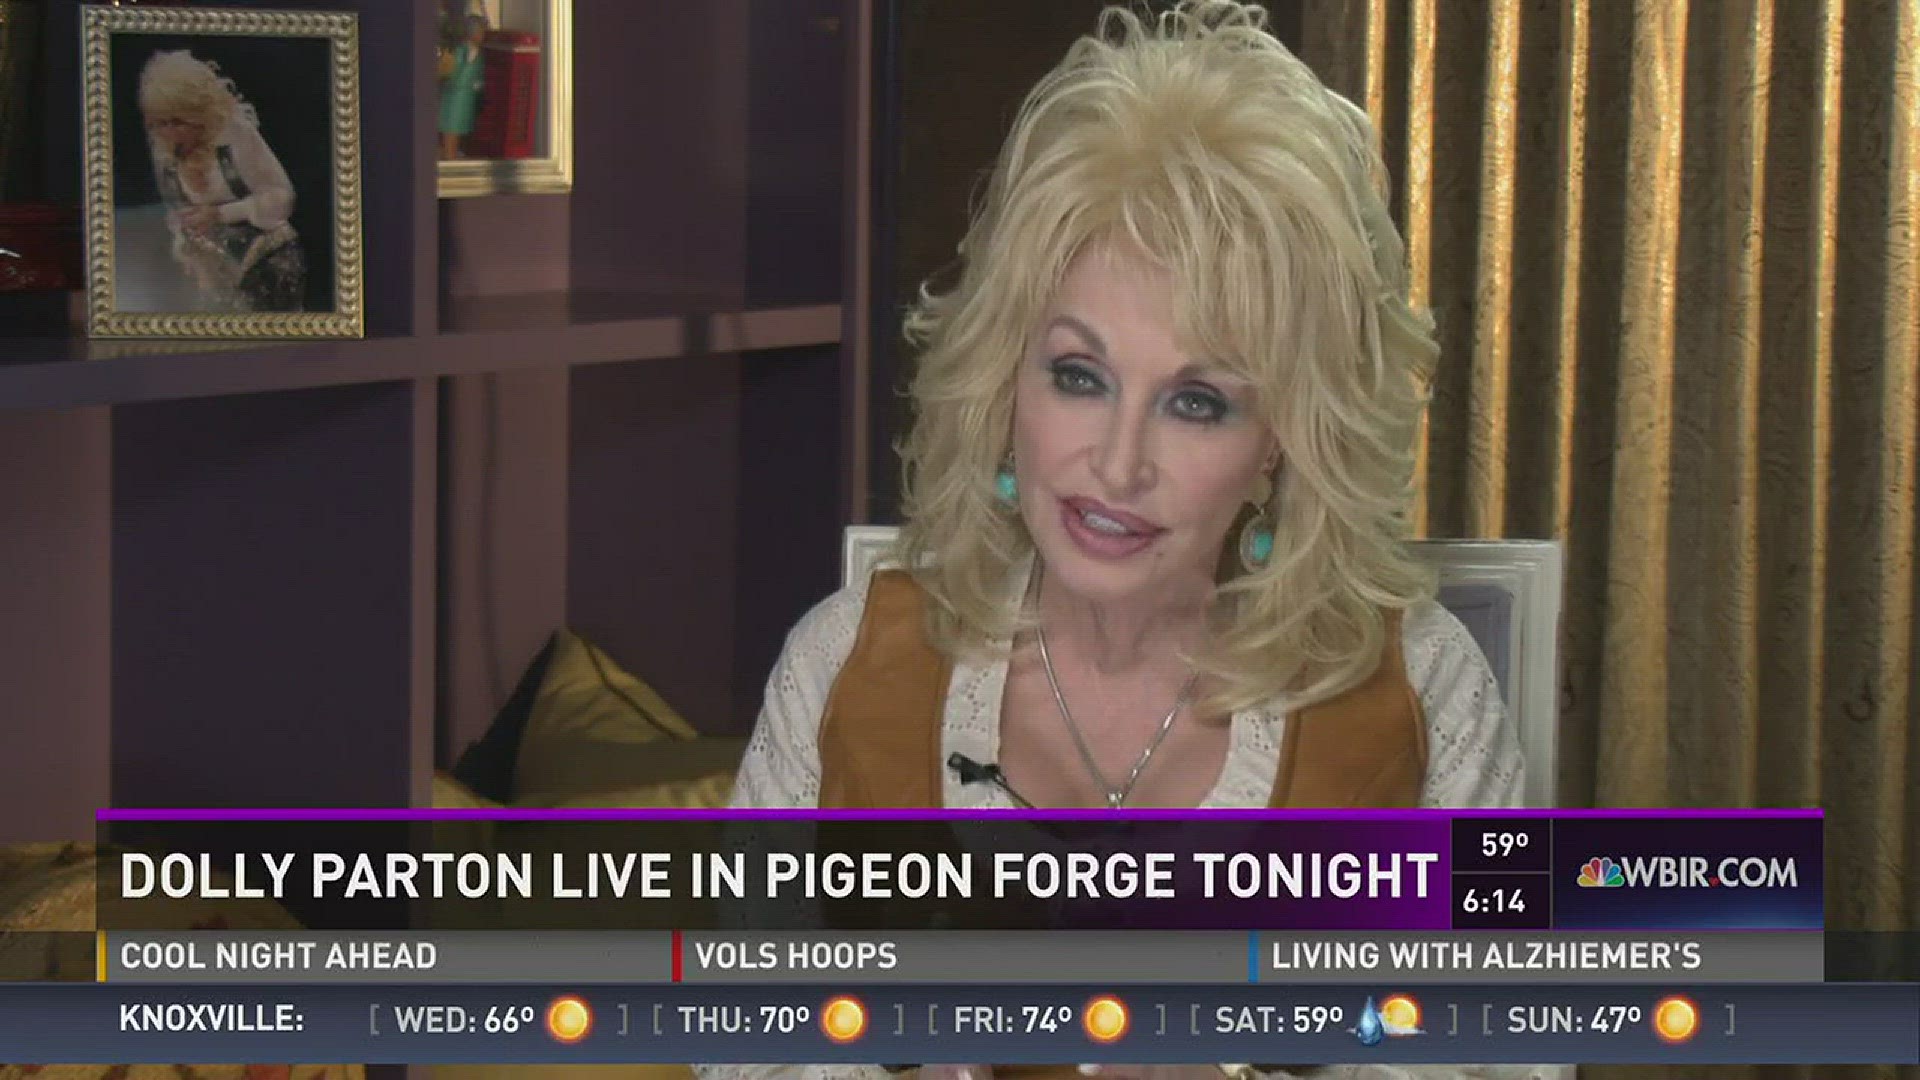 Nov. 15, 2016: Sevier County native Dolly Parton will perform live at the LeConte Center in Pigeon Forge tonight.